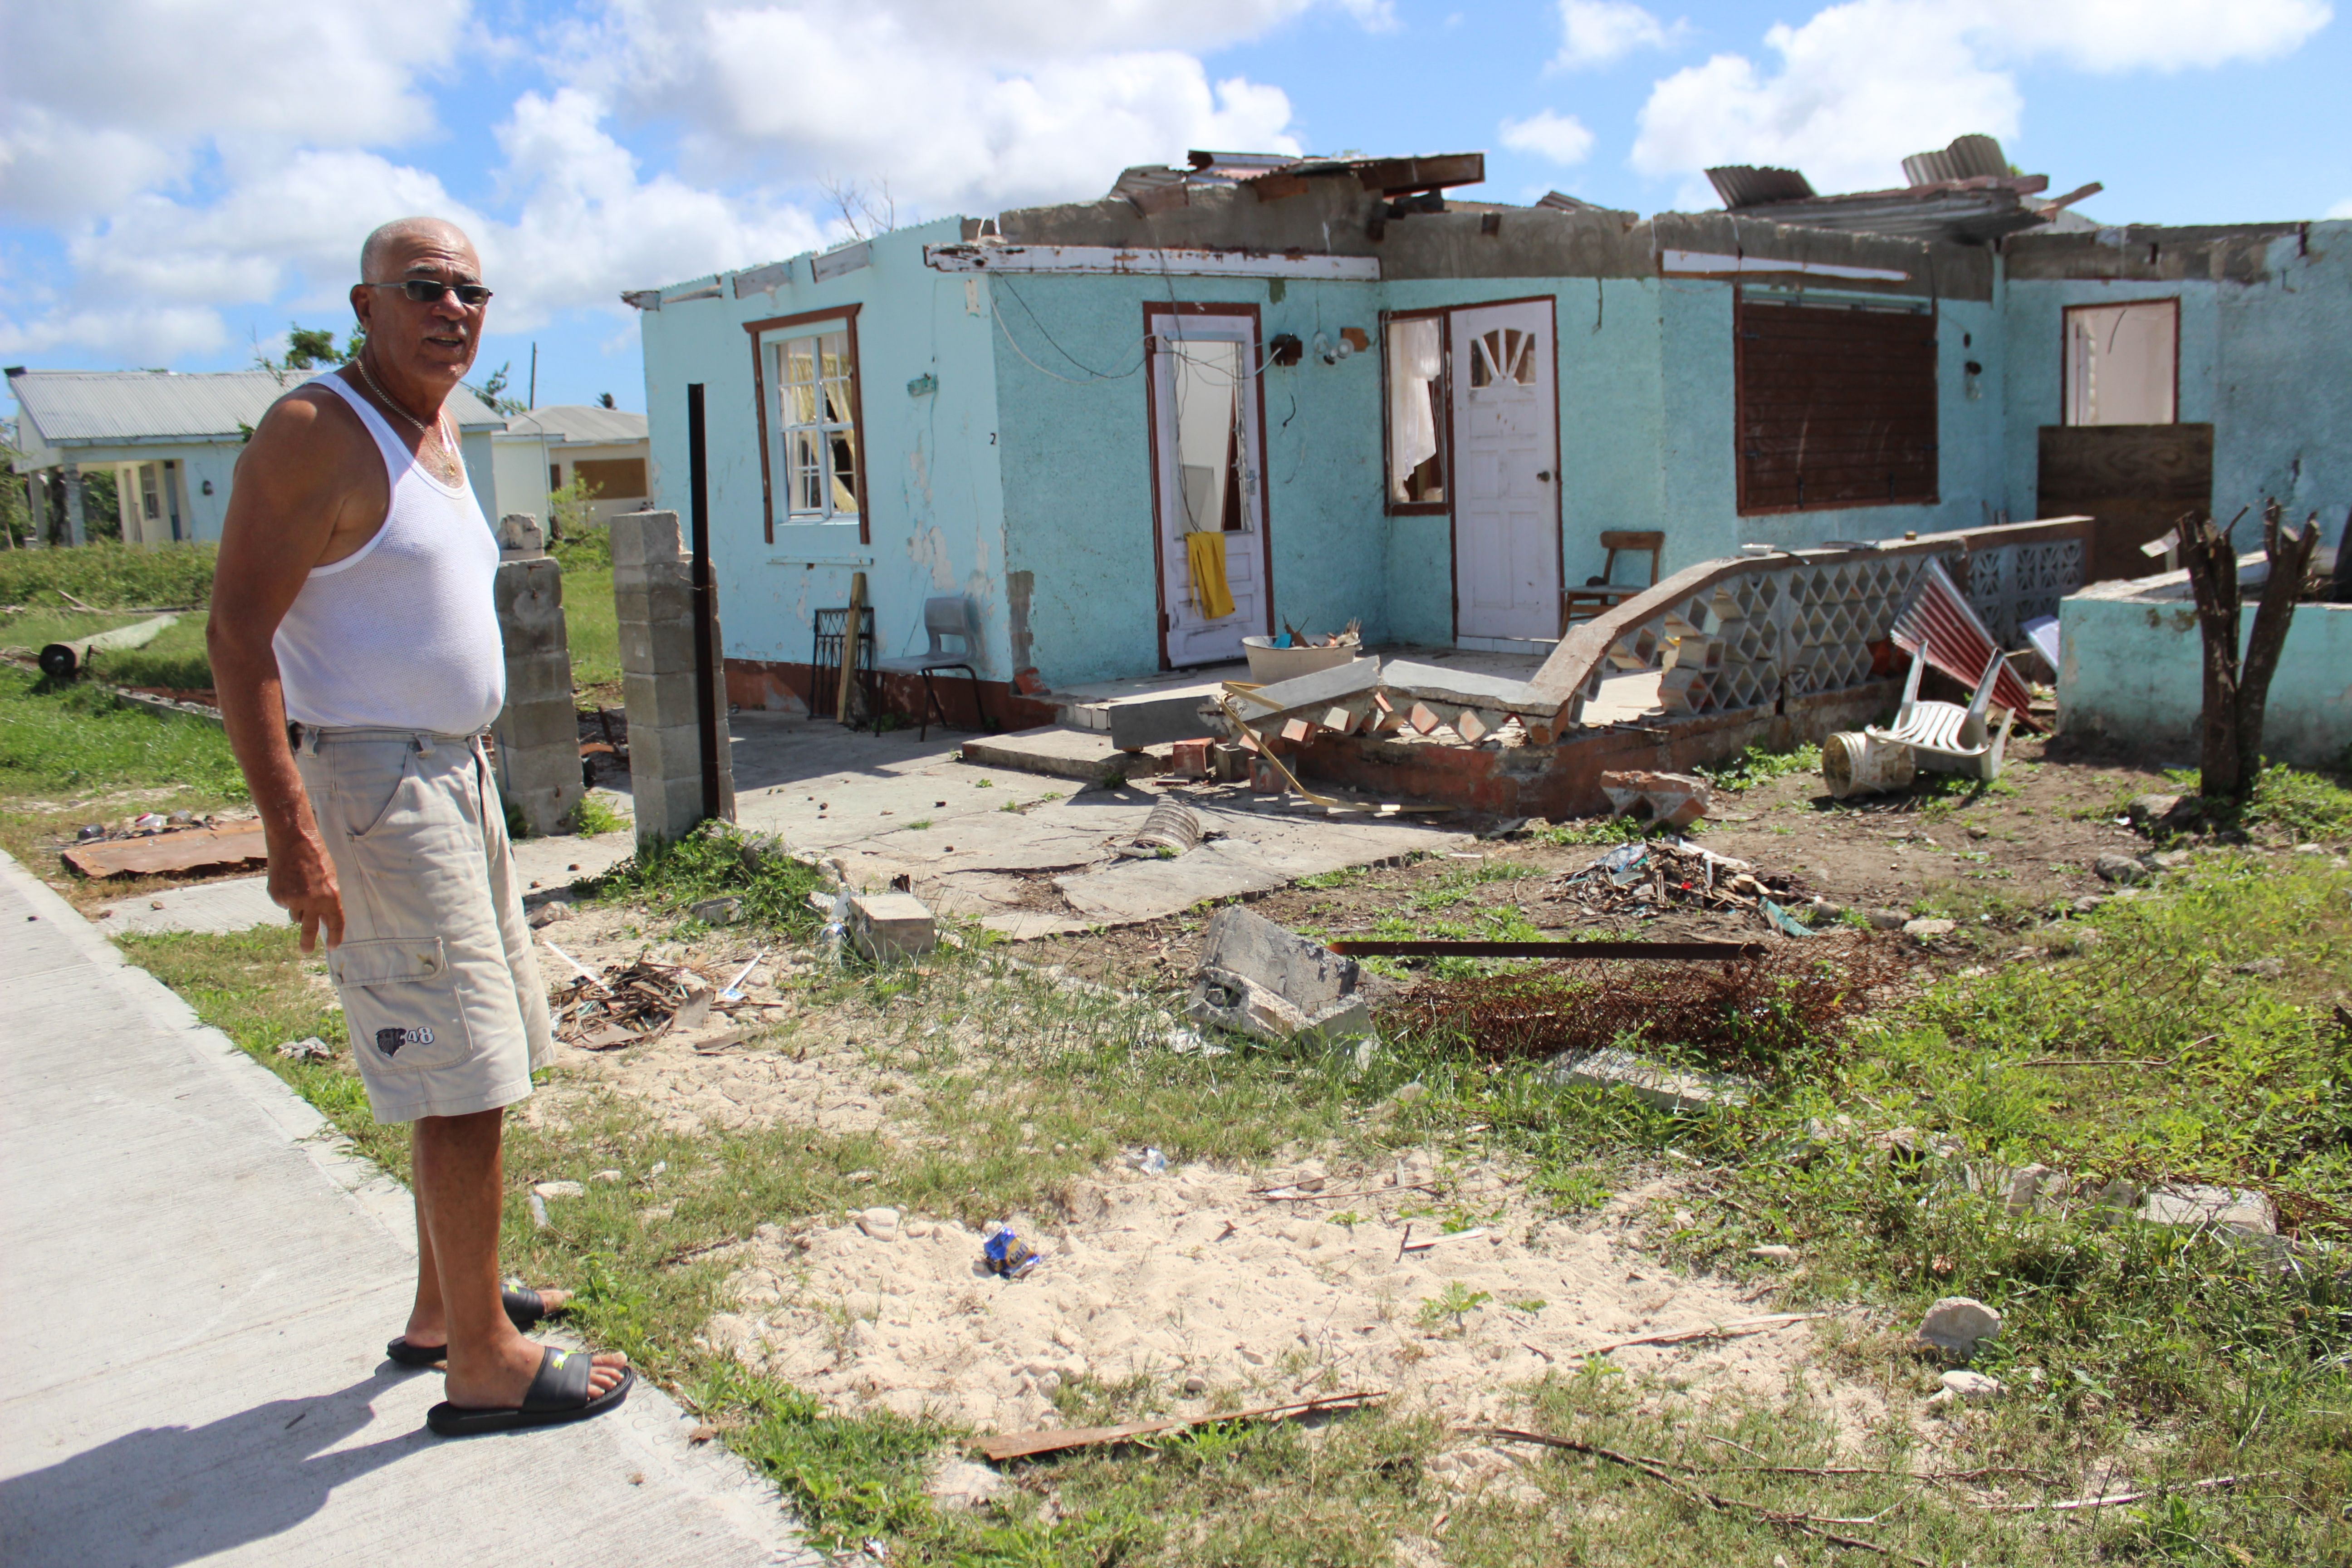 Cliff Drinkwater, a 73-year-old pensioner, surveys the damage to his childhood home in Barbuda's capital Codrington November 17, 2017. An estimated 90 percent of properties were damaged in Barbuda when the Caribbean island was hit by Hurricane Irma on Sept, 6, 2017. Image by Gregory Scruggs. Barbuda, 2017.